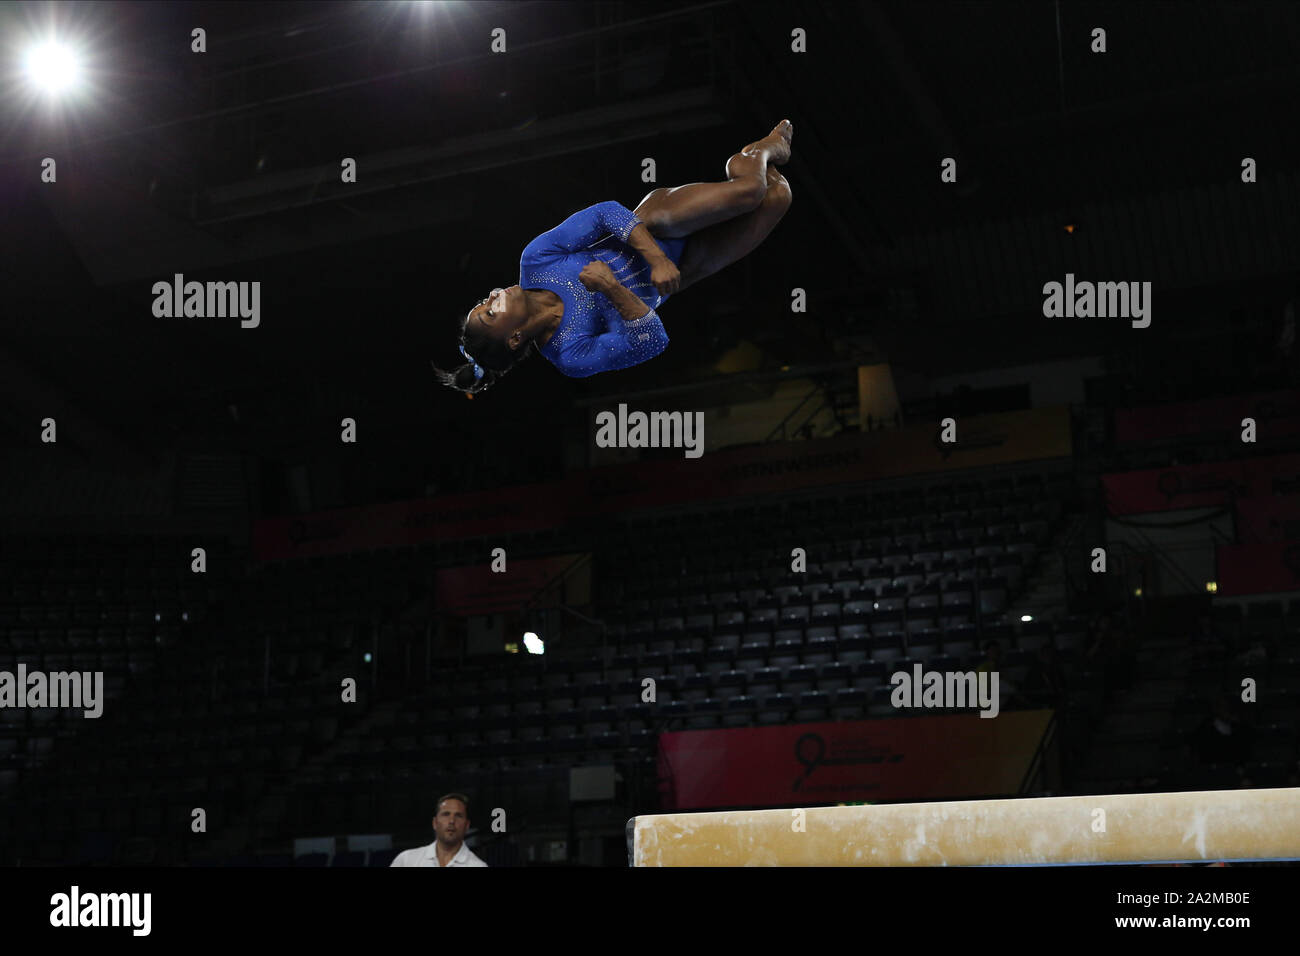 October 1, 2019: Gymnast Simone Biles from the USA during the podium training day at the 2019 World Artistic Gymnastics Championships in Stuttgart, Germany. Biles warms up a double-twisting double back dismount, a skill she hopes will be named after her, while coach Laurent Landi watches. Melissa J. Perenson/CSM Stock Photo